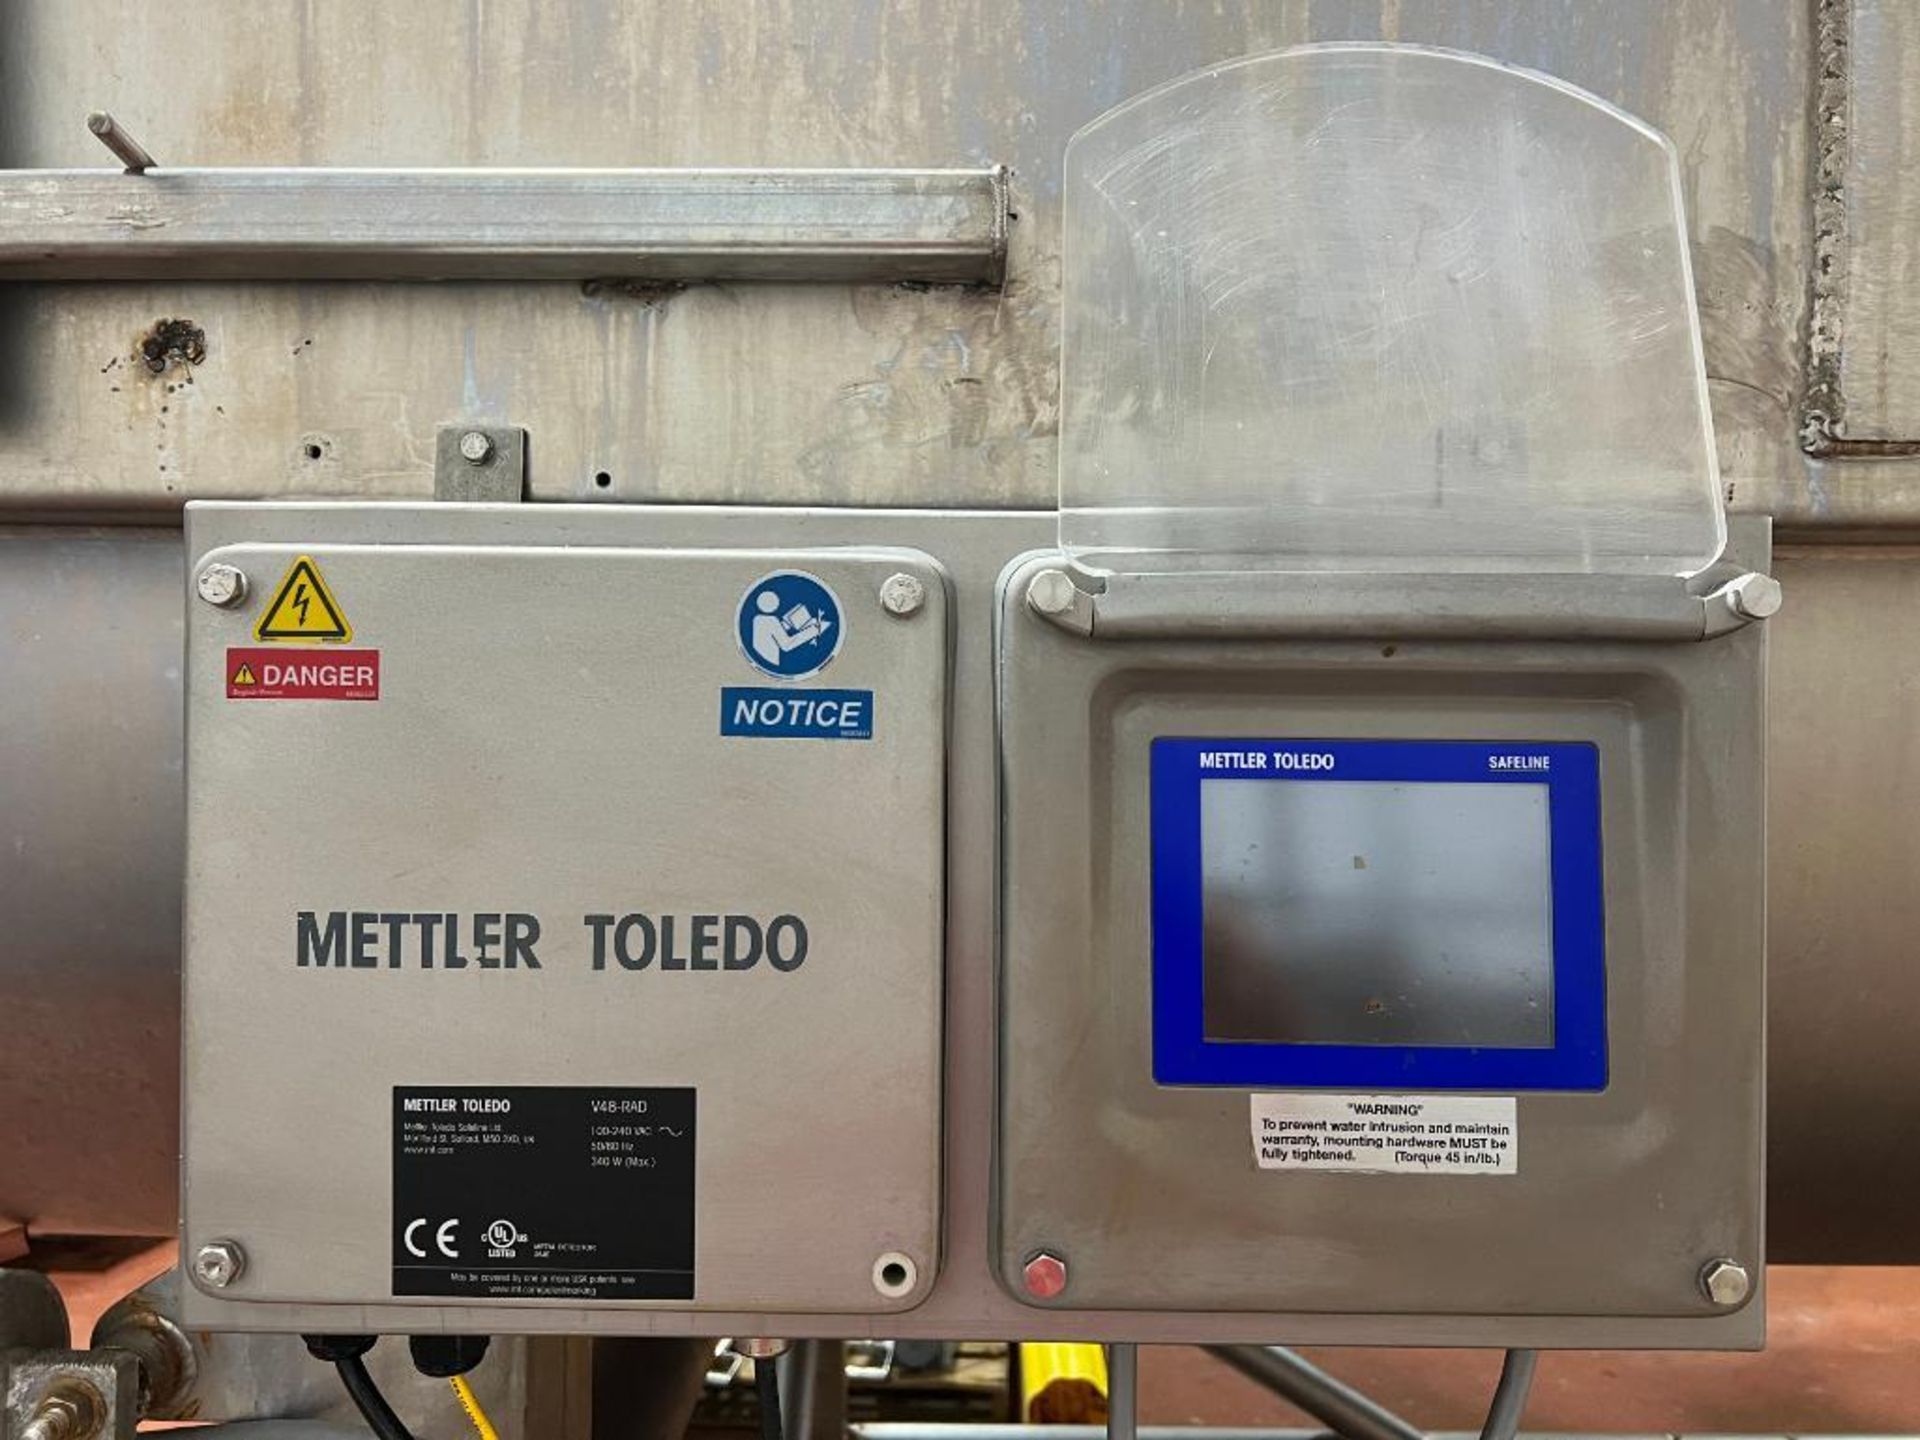 Mettler Toledo Metal Detector, Model: V48-RAD with Touchscreen HMI (Subject to Confirmation) - Riggi - Image 2 of 3